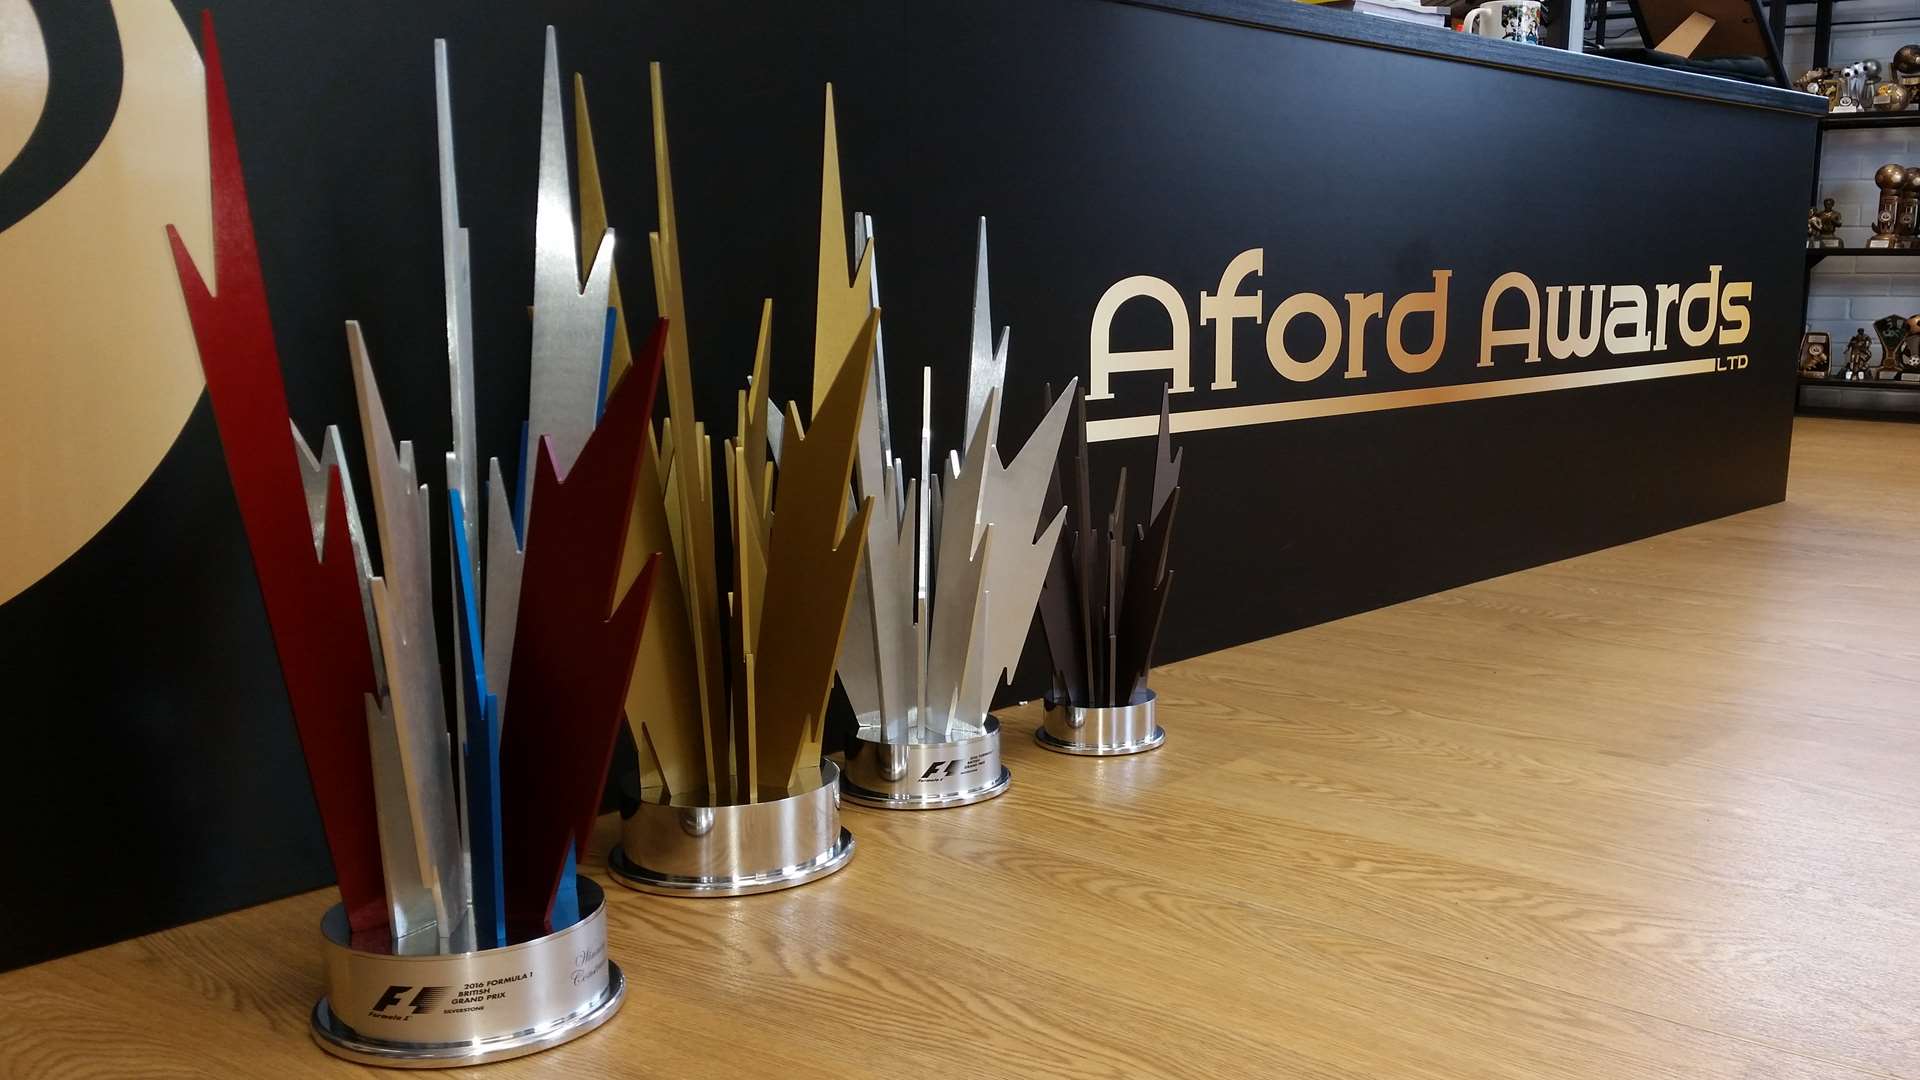 The British Grand Prix trophies designed by Aford Awards